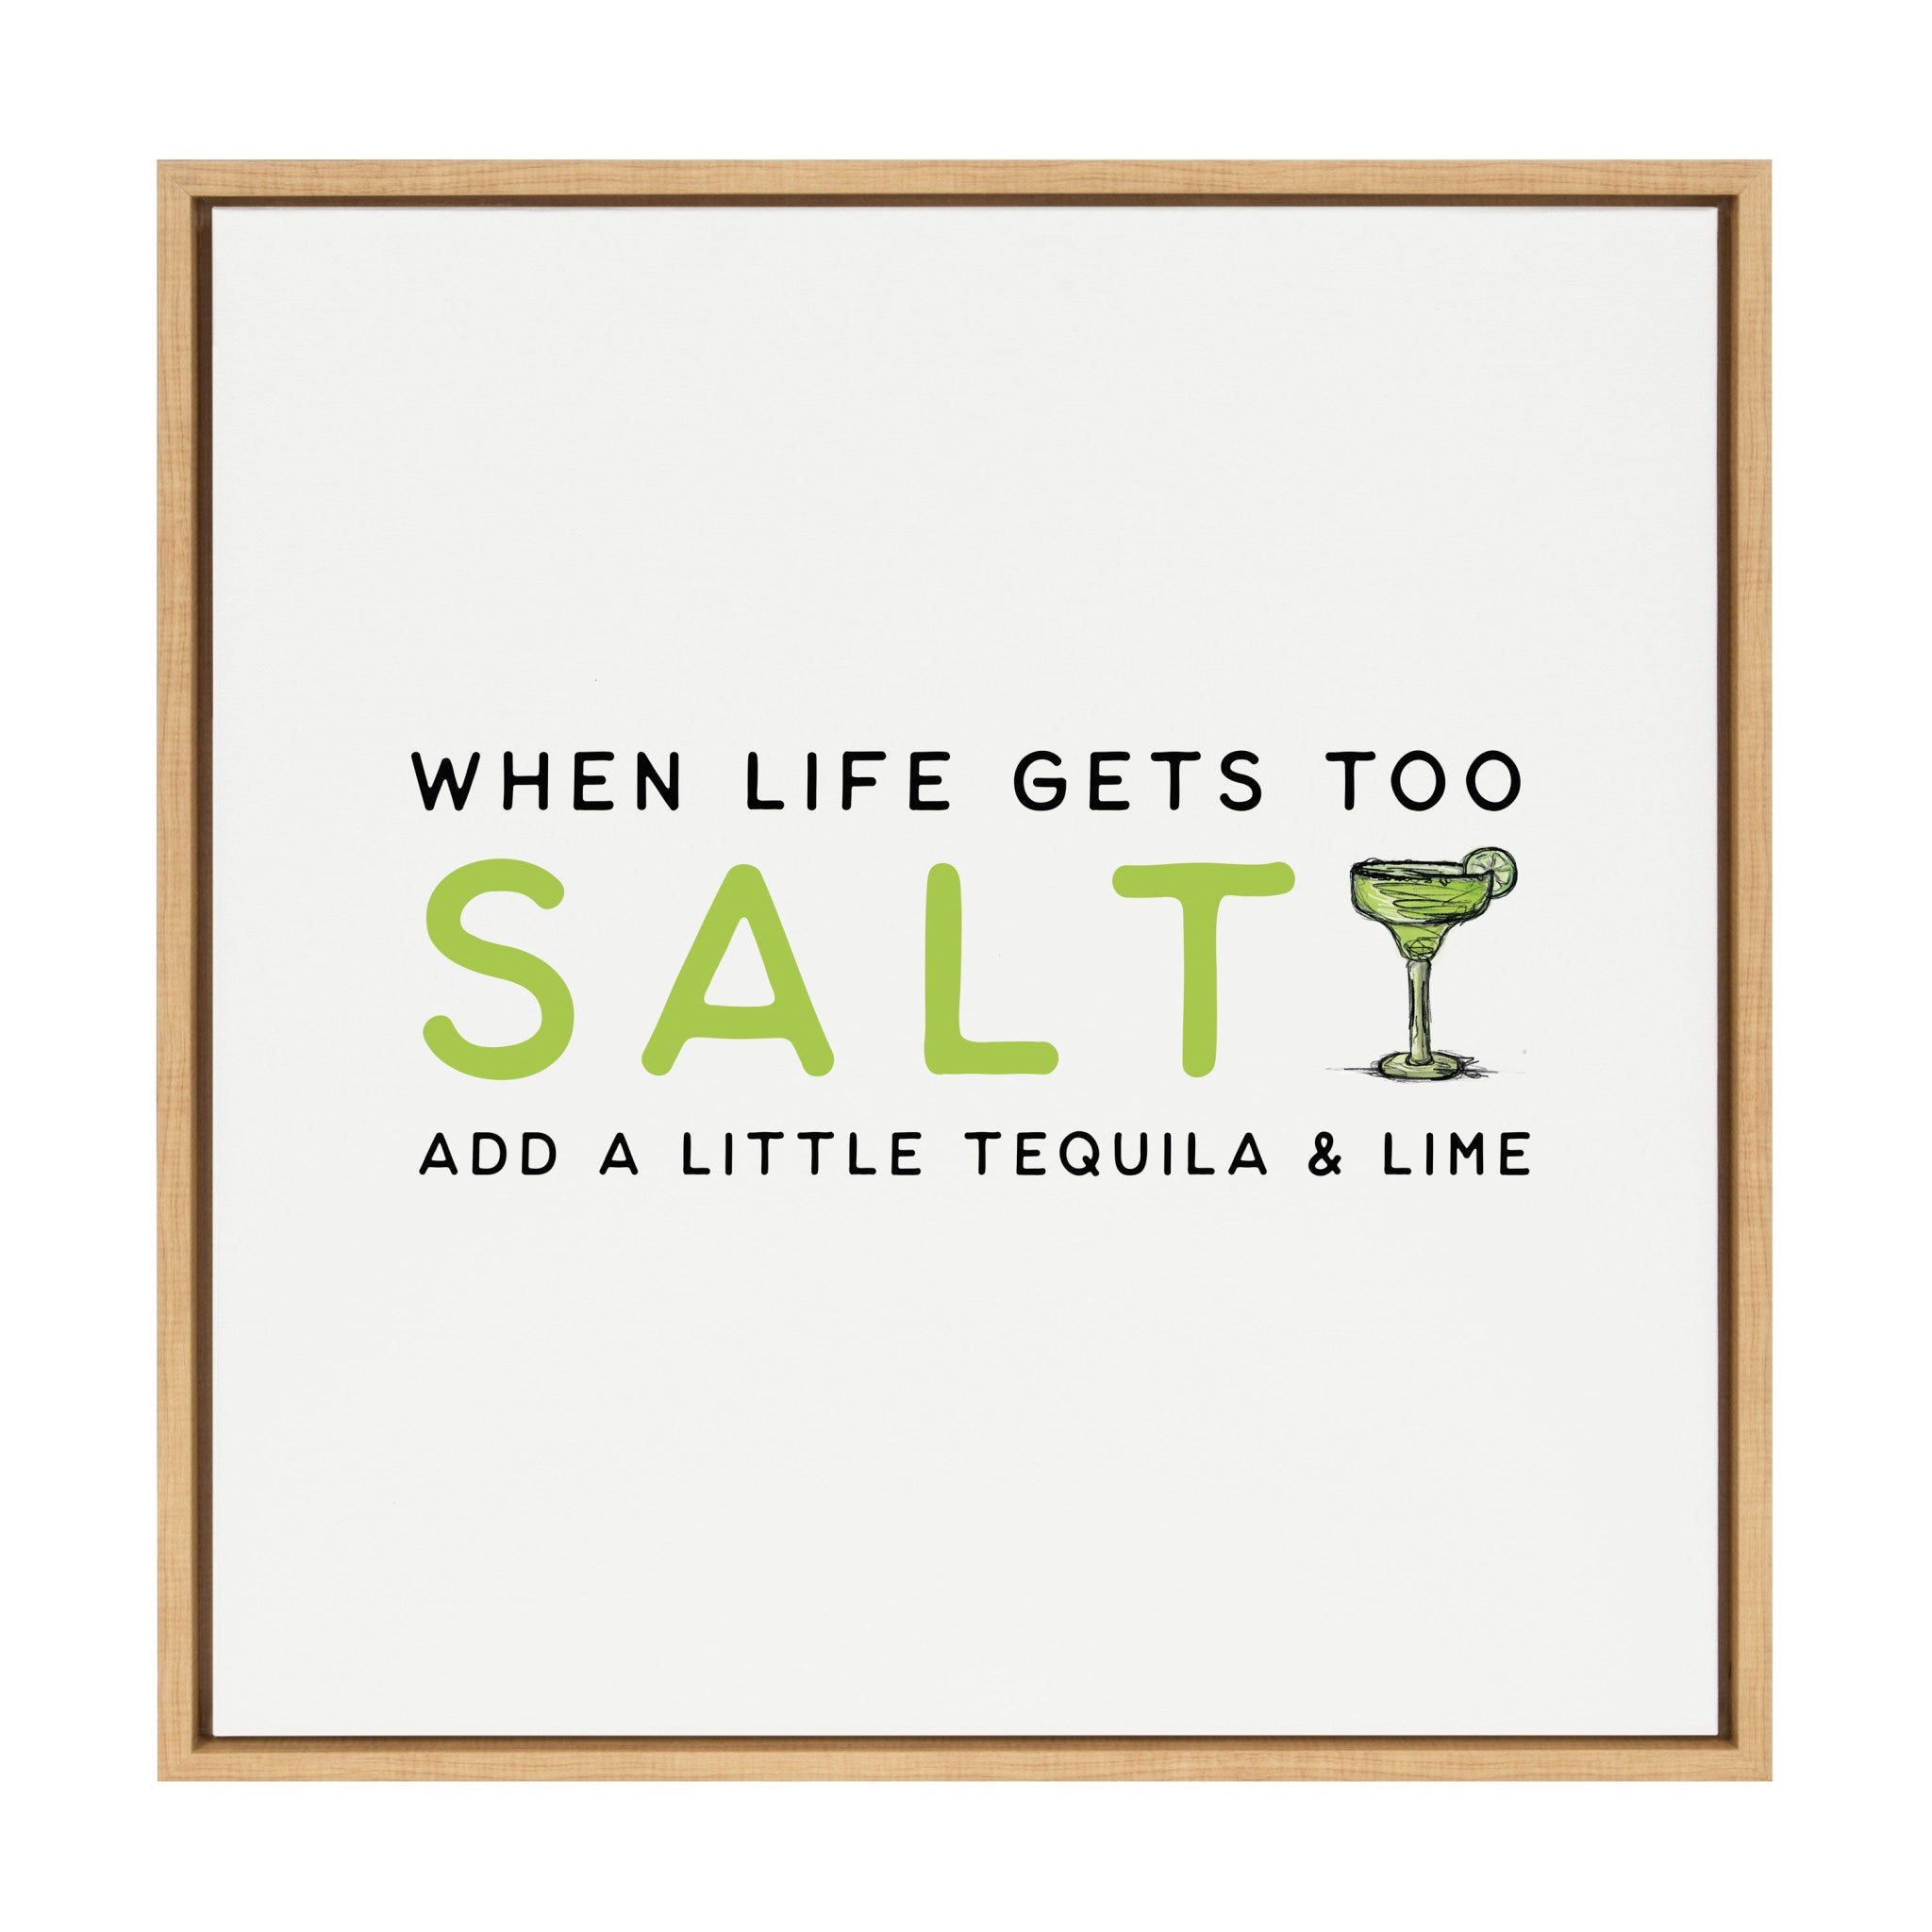 Sylvie Cocktail Quote Salty Tequila and Lime Framed Canvas by The Creative Bunch Studio